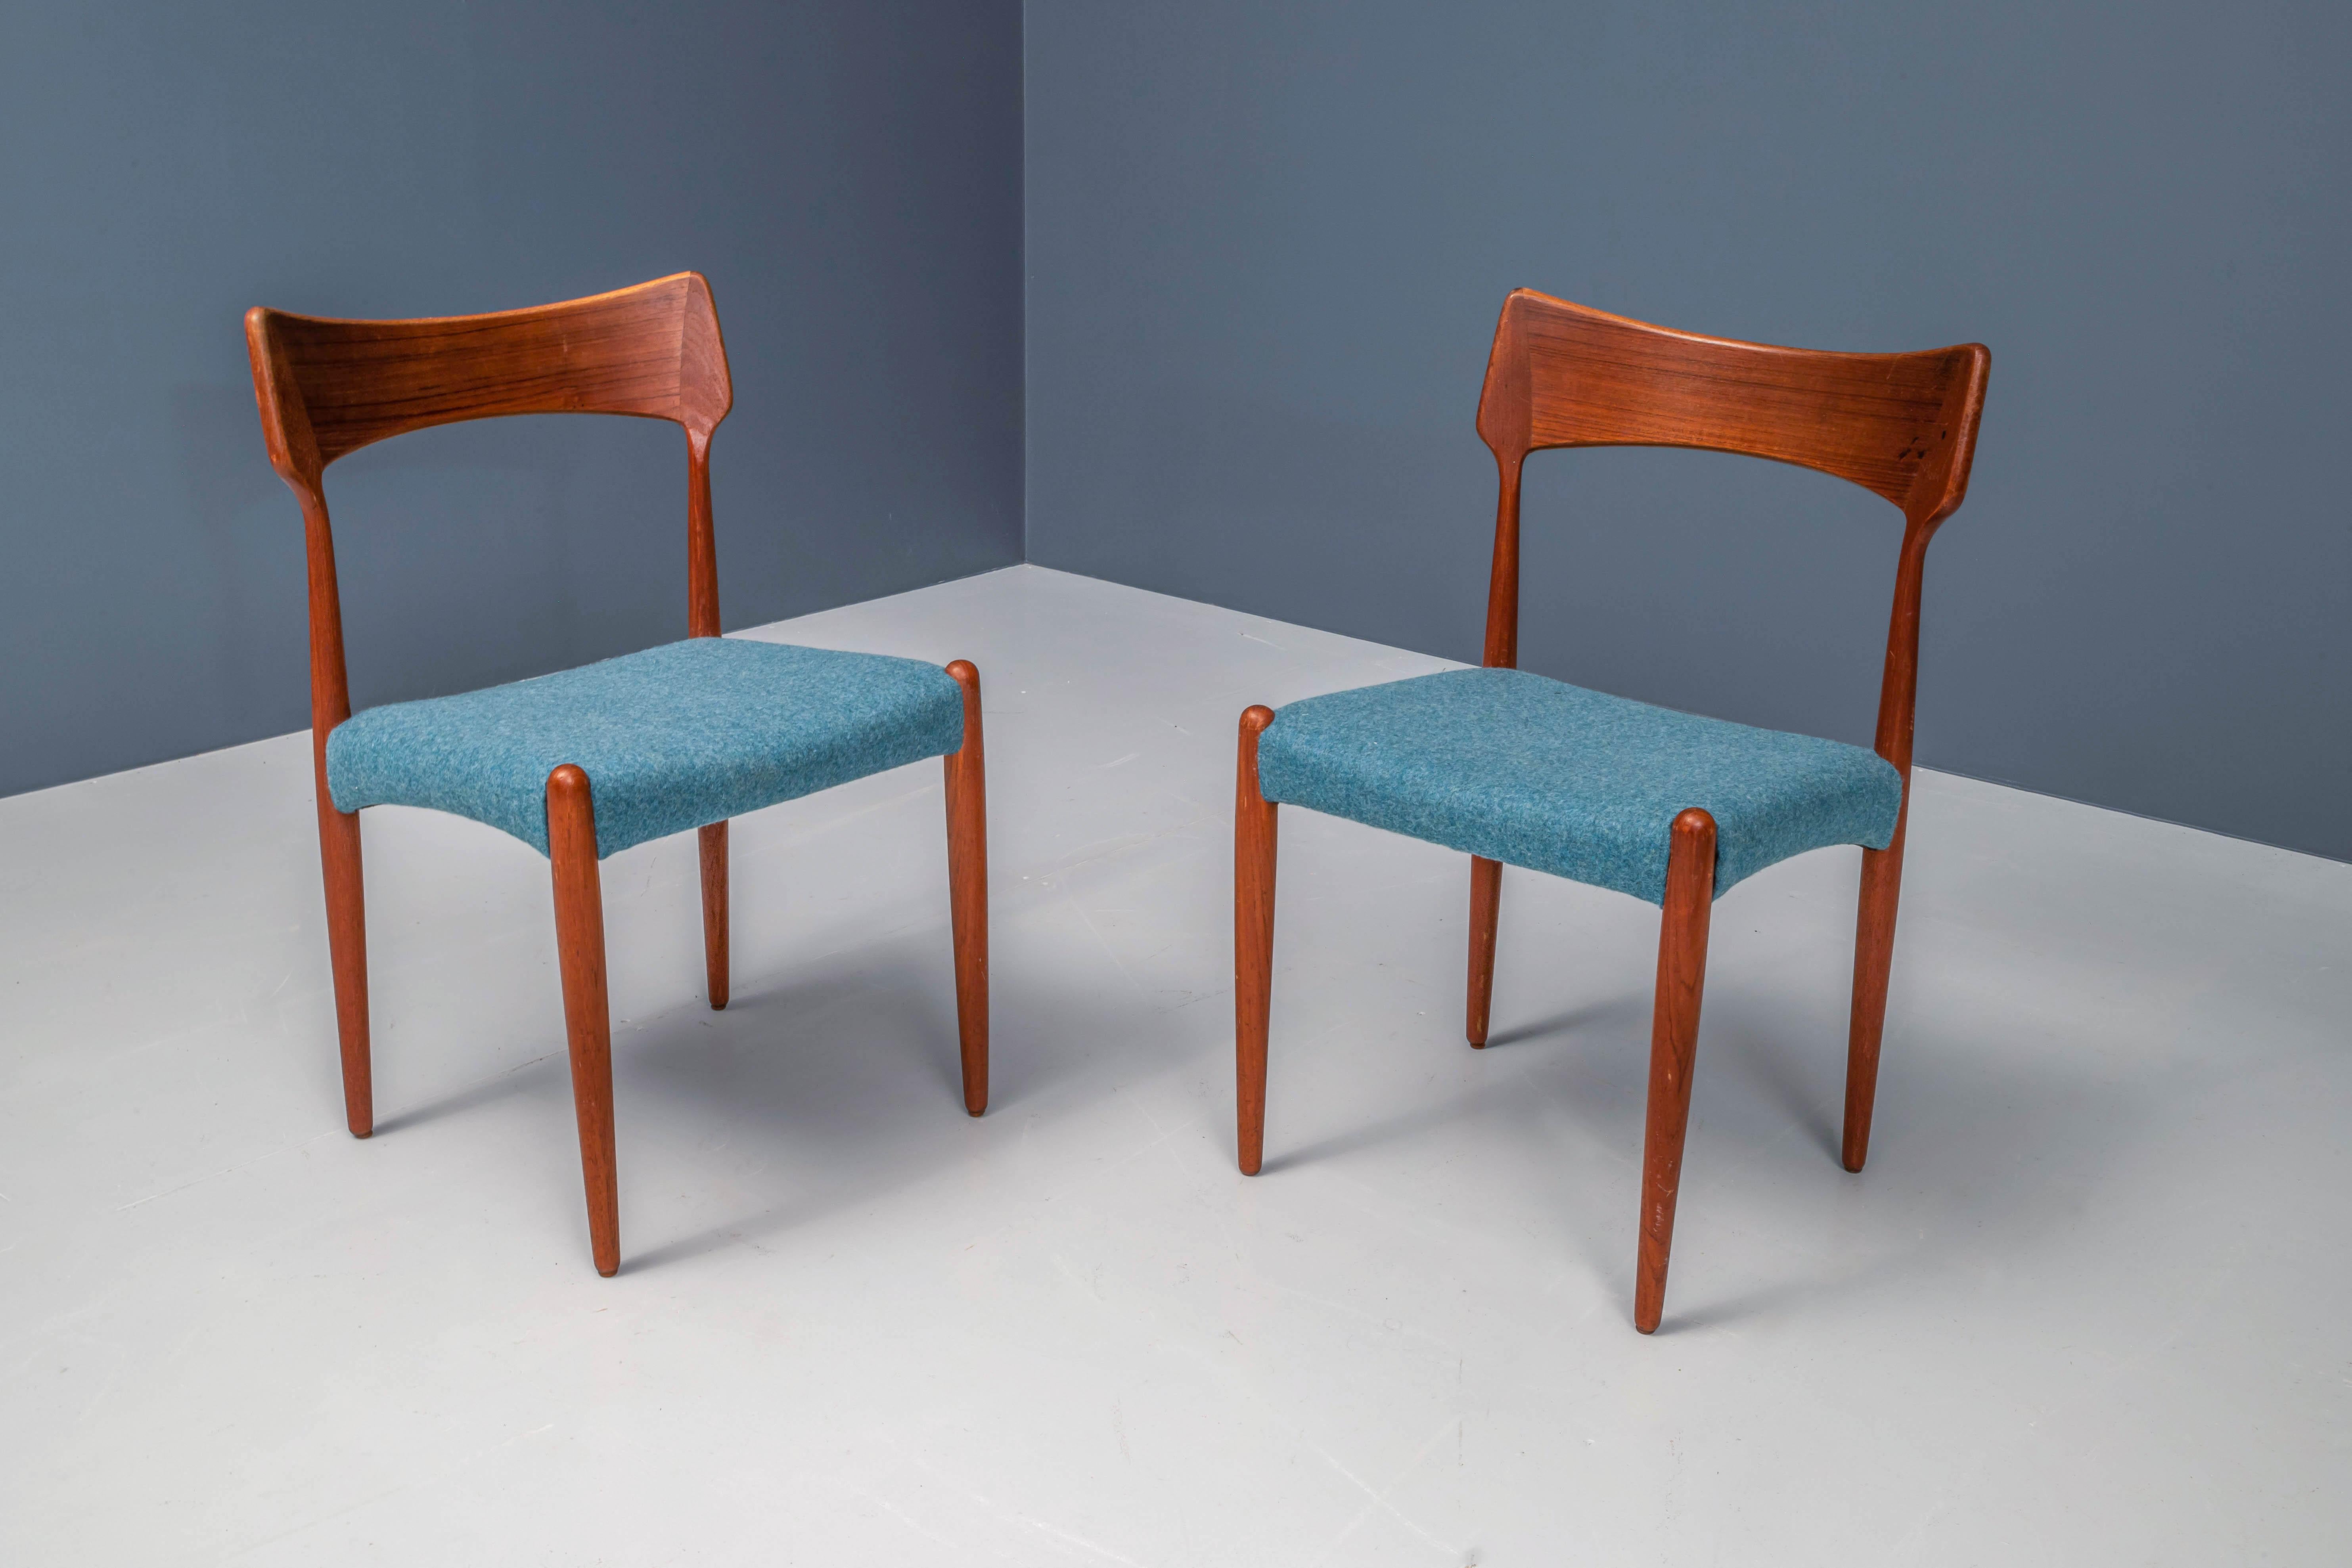 Looking for some fresh and crisp Danish elements in your house? A set of 4 newly upholstered teak chairs in petrol blue wool that forms a good contrast with the very warm brown wood. Great shapes in the backrest that will catch your eye every moment